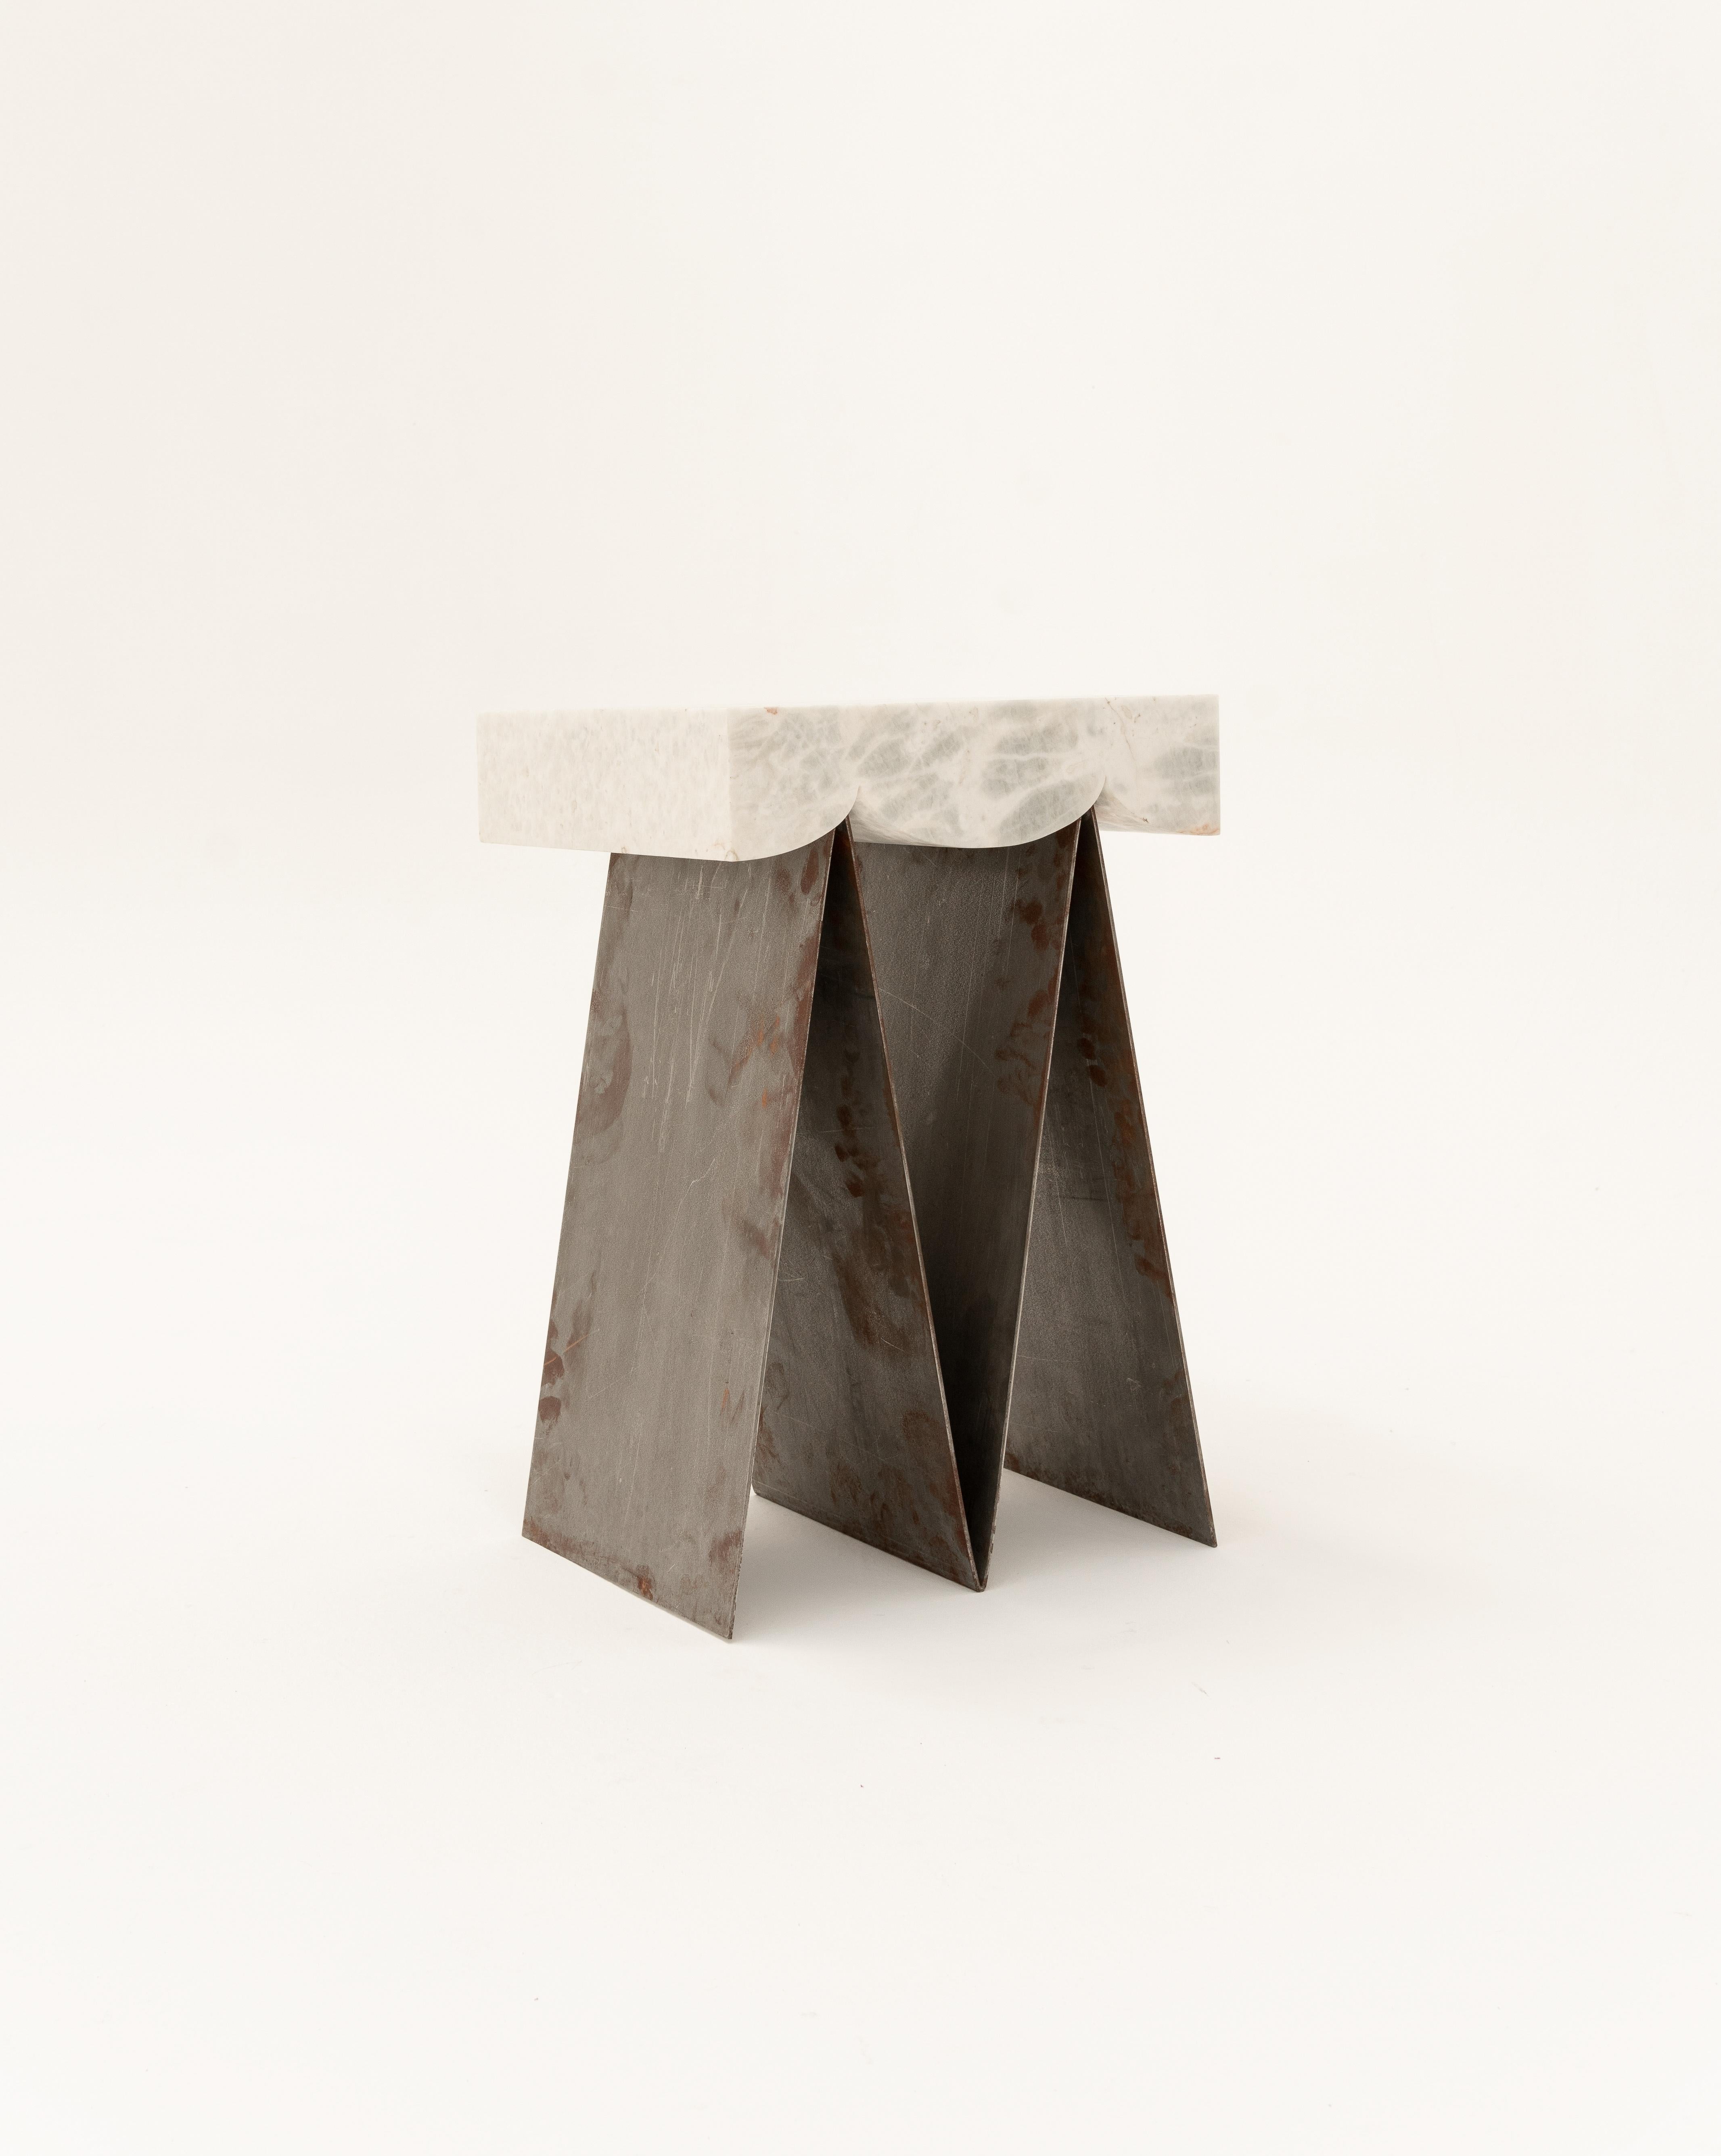 Understood as the material of progress and as an emblem of the modern movement from the middle of last century, steel is the fundamental axis of the Glacier collection. 

The item is a segmented side table conformed by two pieces that fit